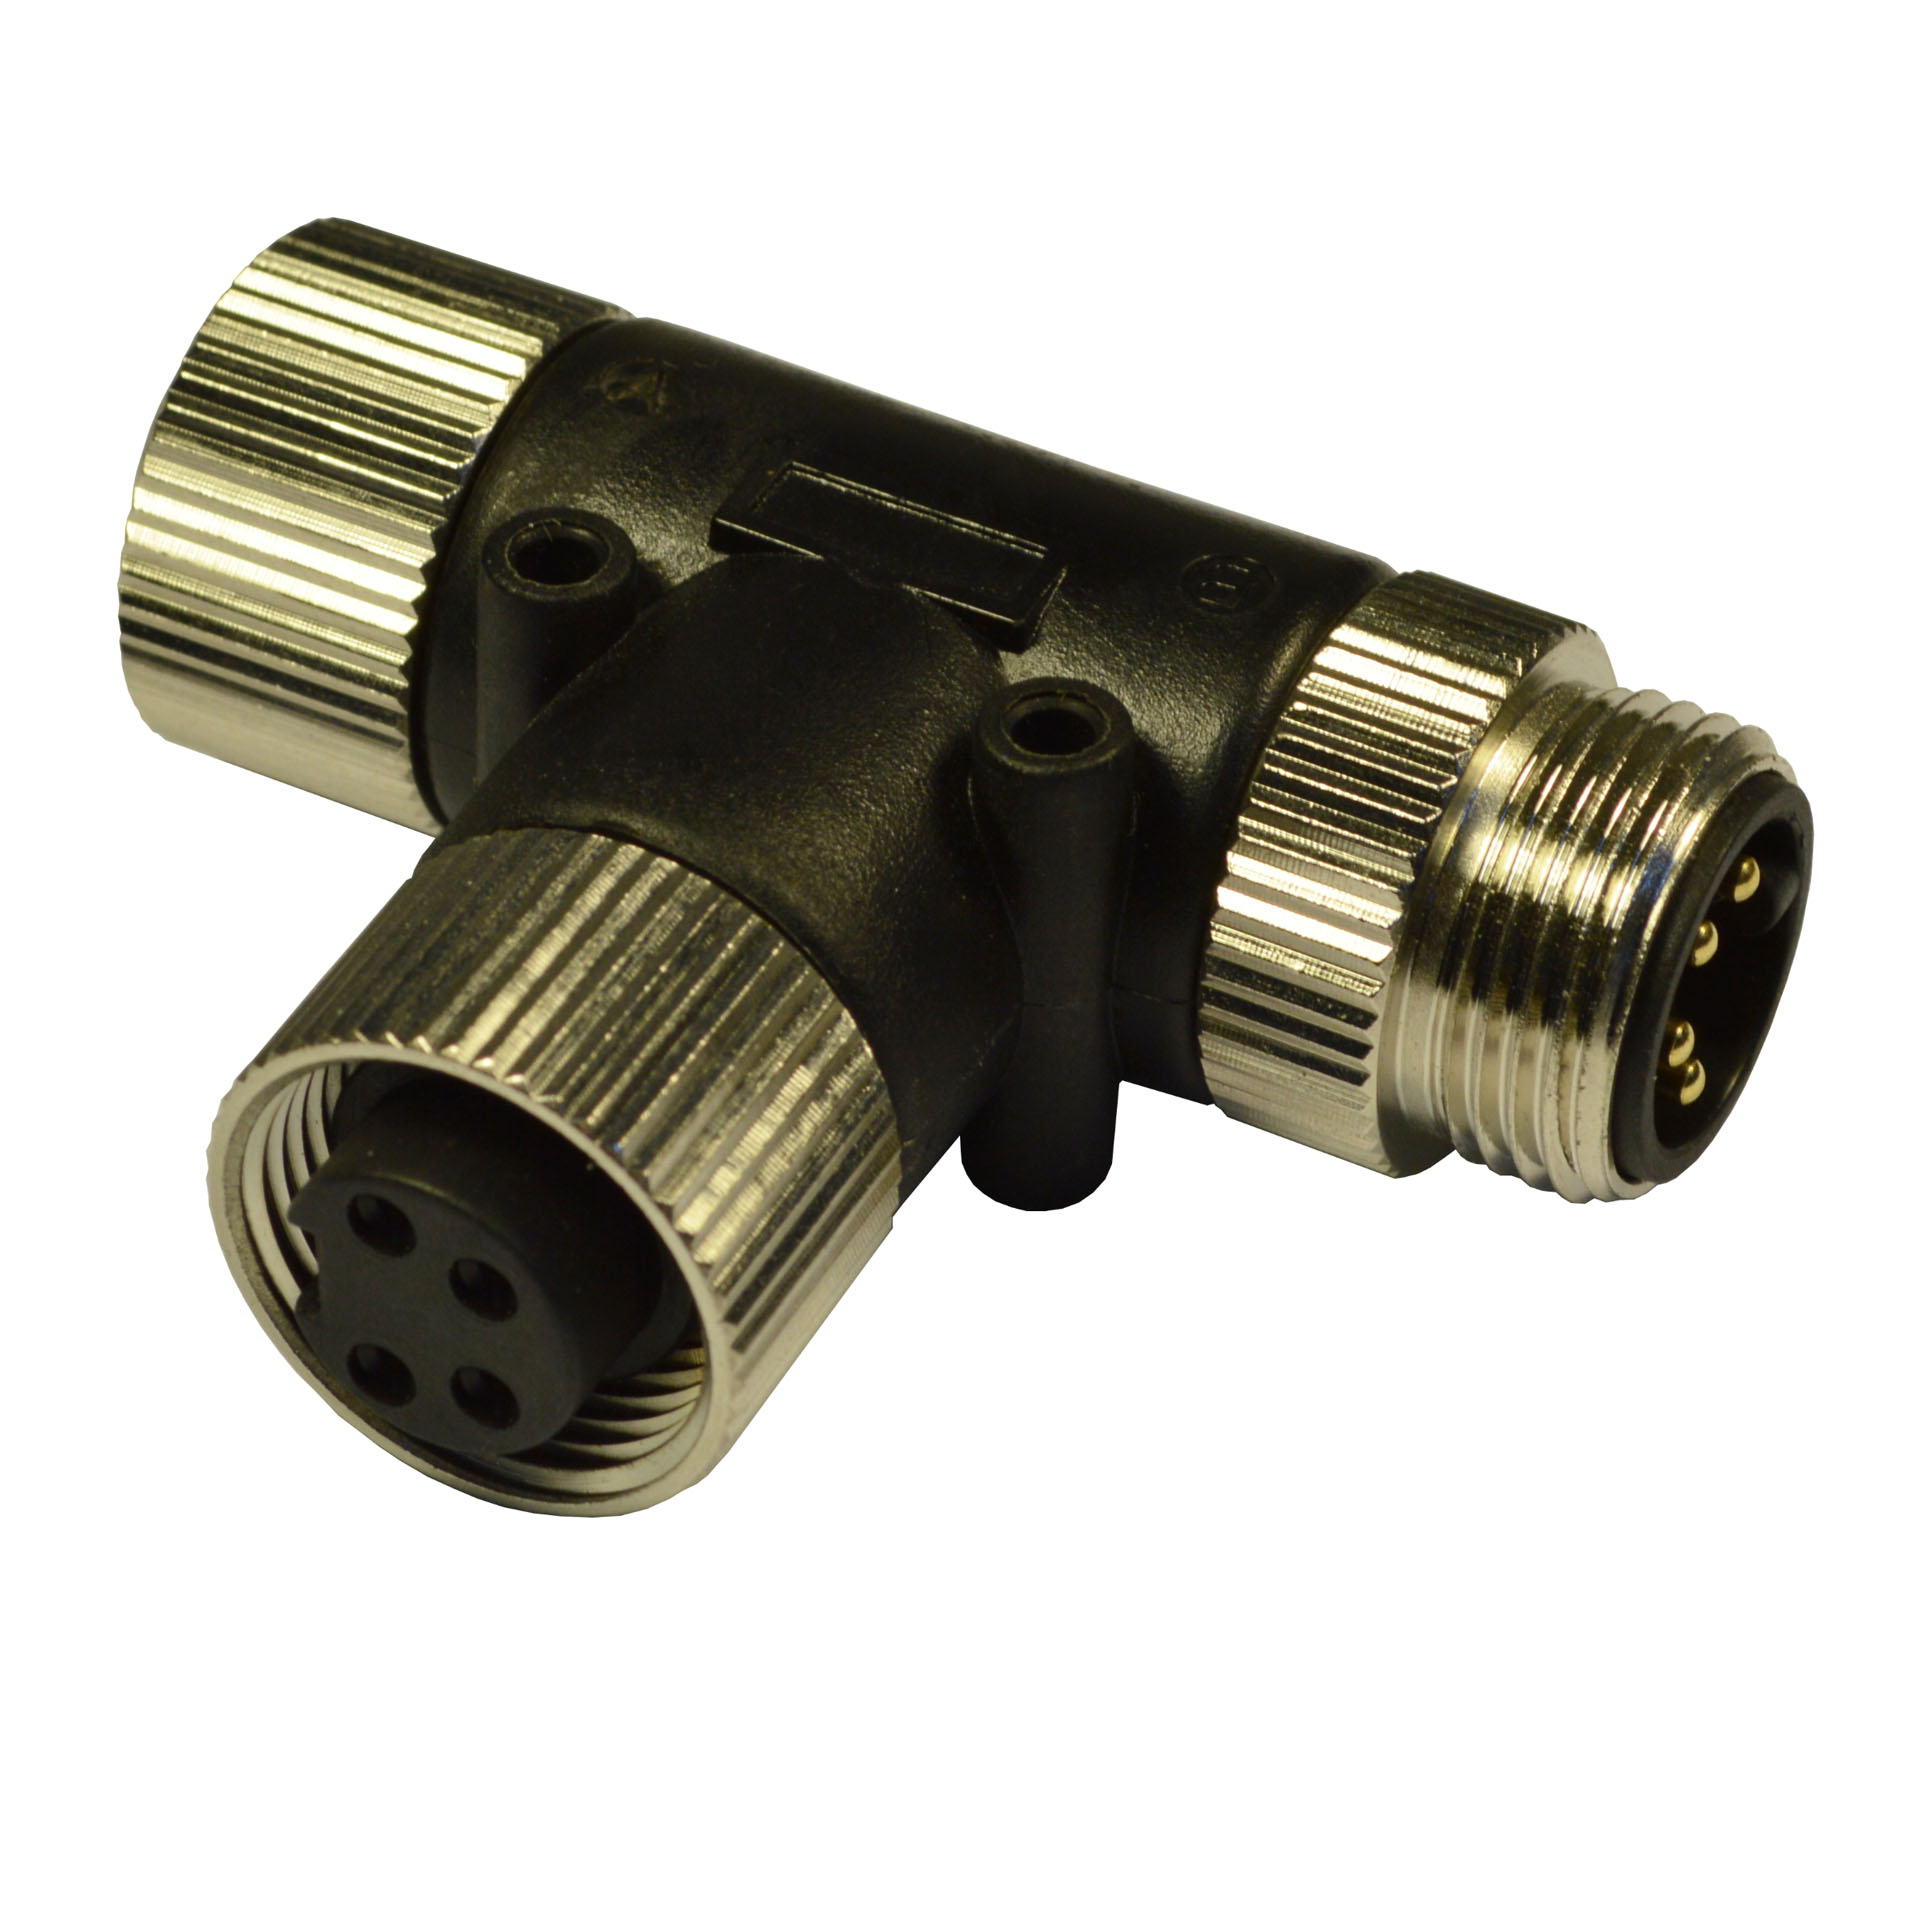 7/8" T connector, SIDE A:female 4p. SIDE B:male 4p., INPUT: female 4p. ,Parallel circuit.